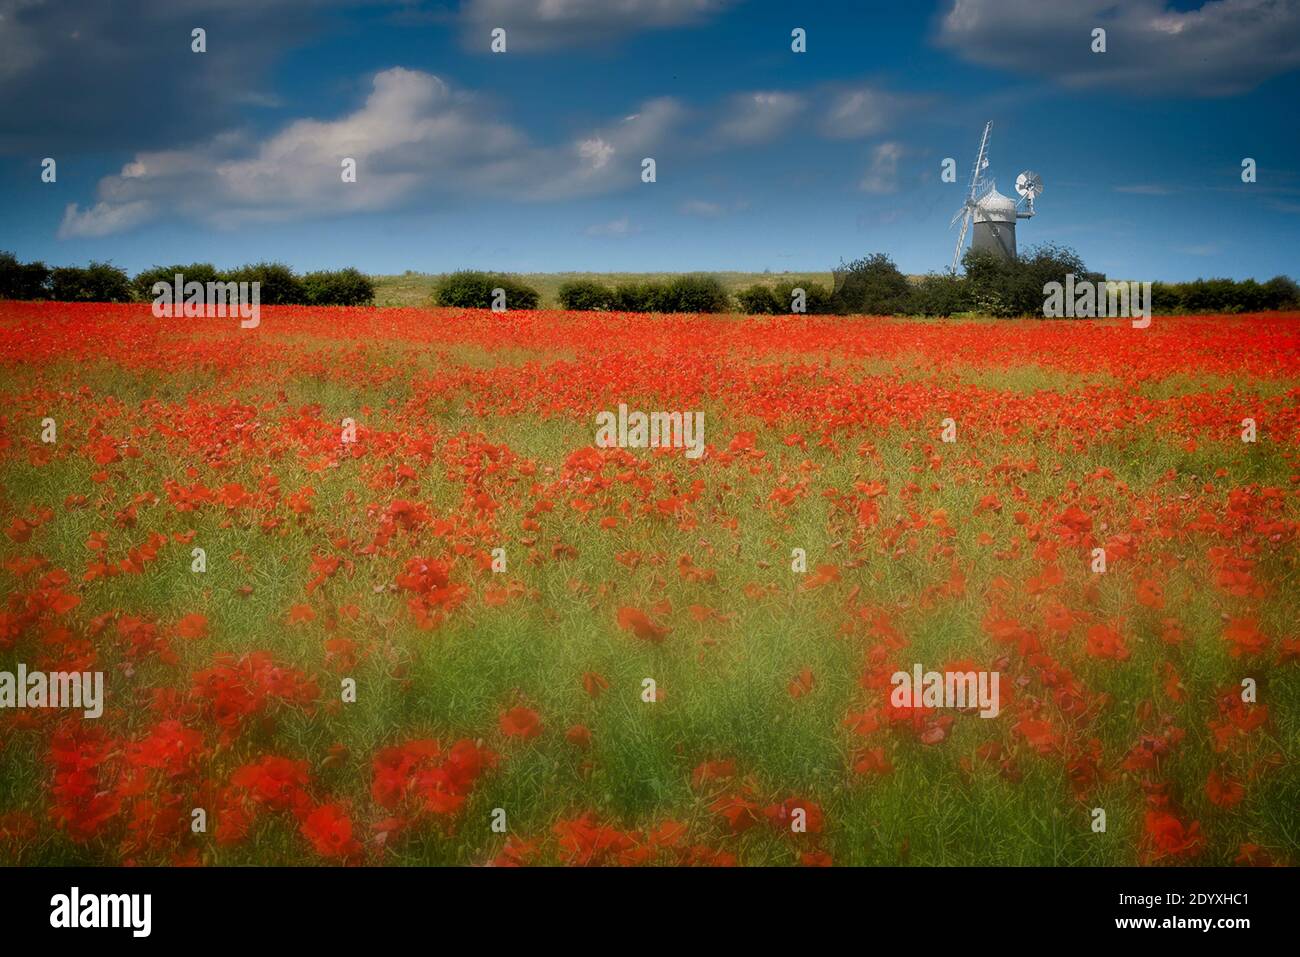 Red diffused poppies in field with hedgerow in distance. Windmill on skyline with blue sky and fluffy white clouds. Stock Photo